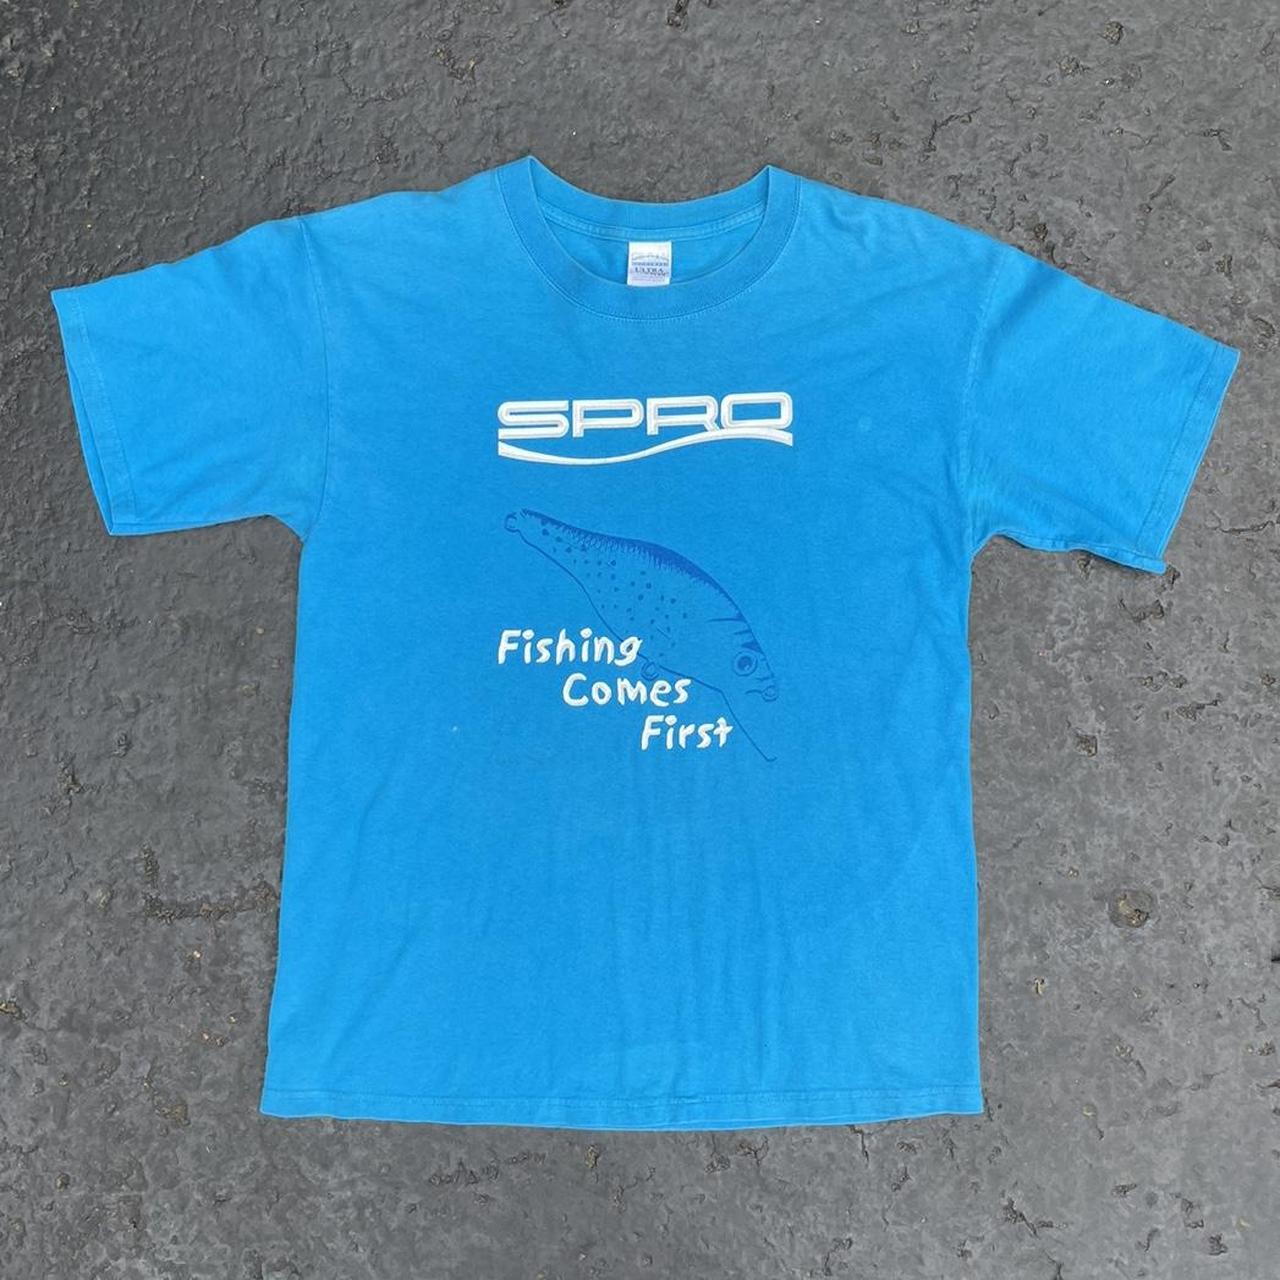 Vintage SPRO fishing comes first t-shirt, SIZE